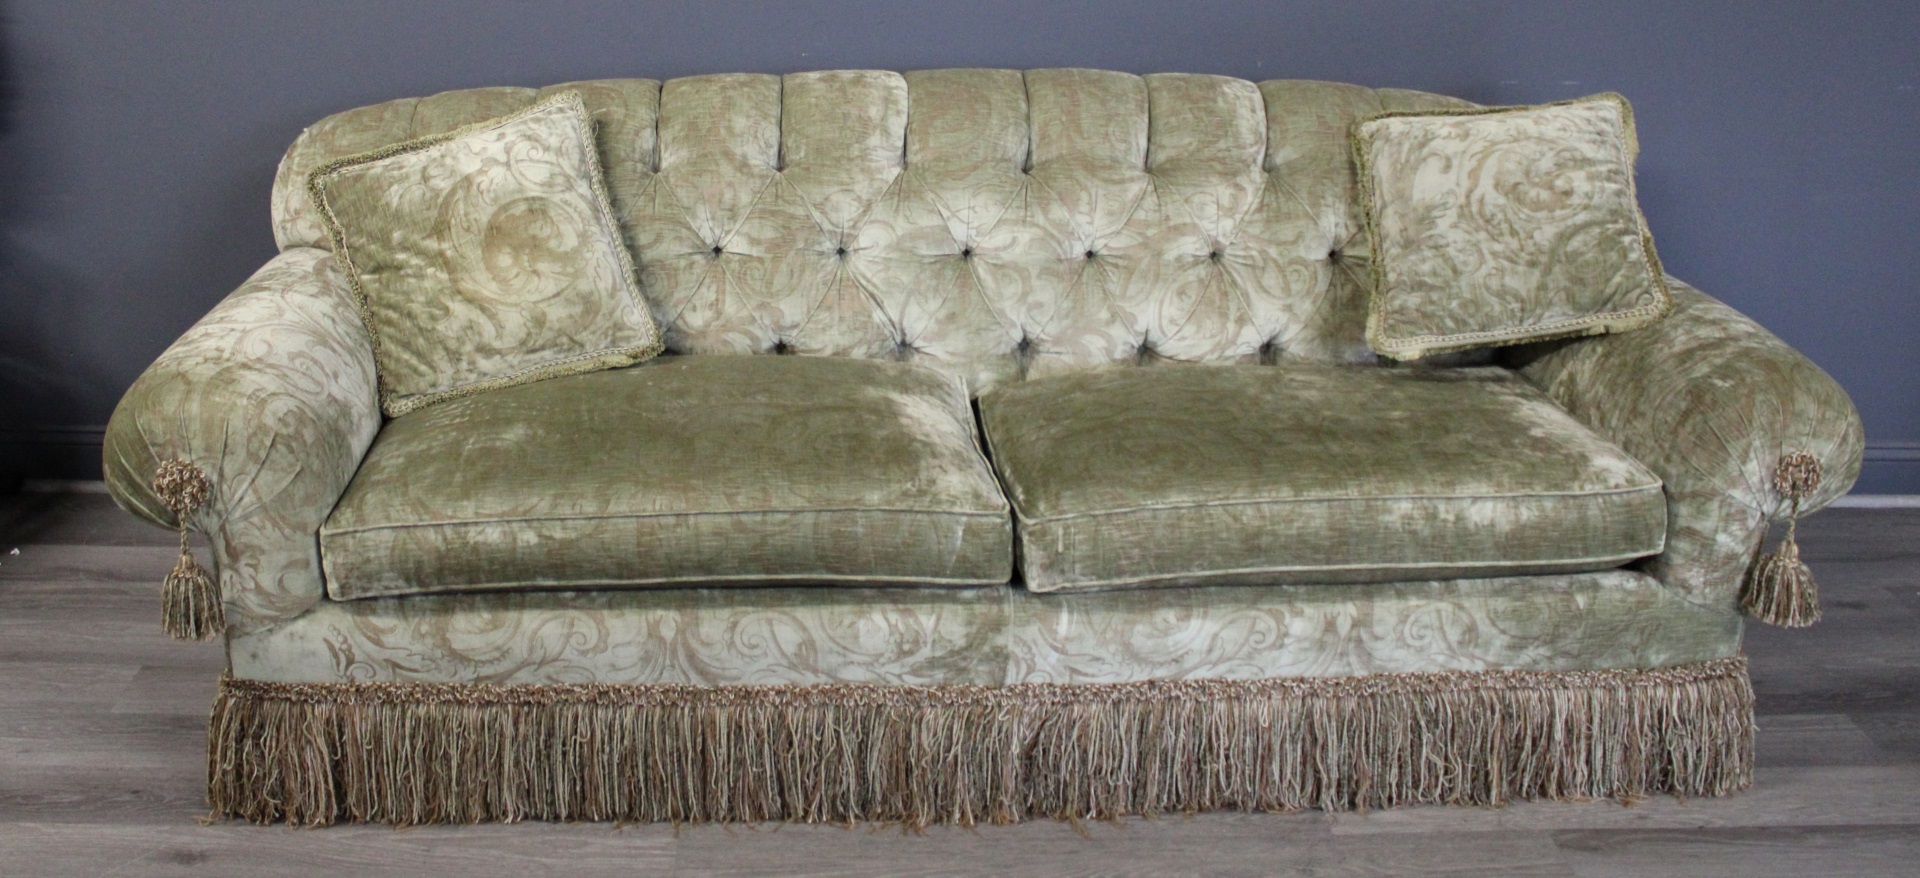 VINTAGE UPHOLSTERED ART DECO STYLE 3bc705